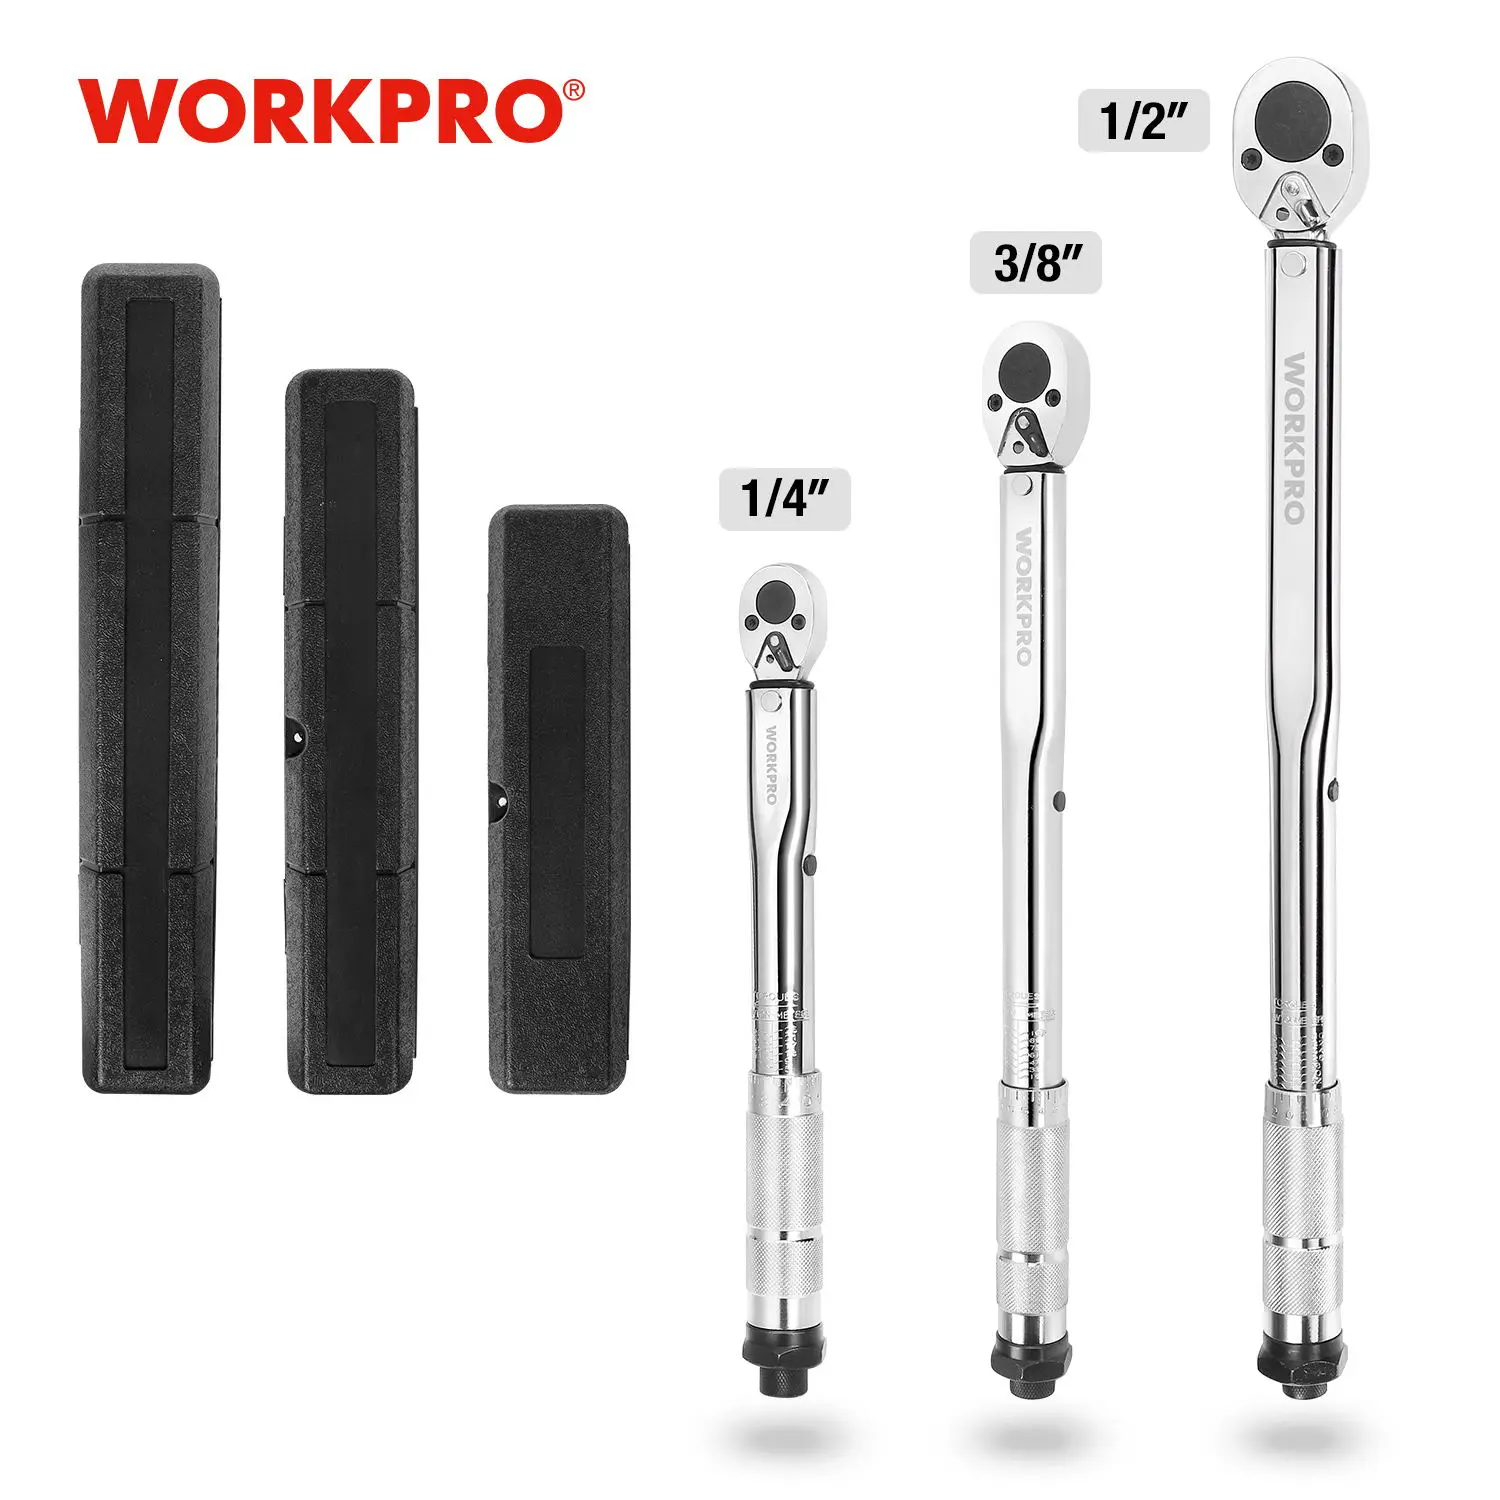 WORKPRO 1/4 3/8 1/2 Square Drive Torque Wrench 5-100 Ft-lb Two-way Precise Ratchet Wrench Repair Spanner Key